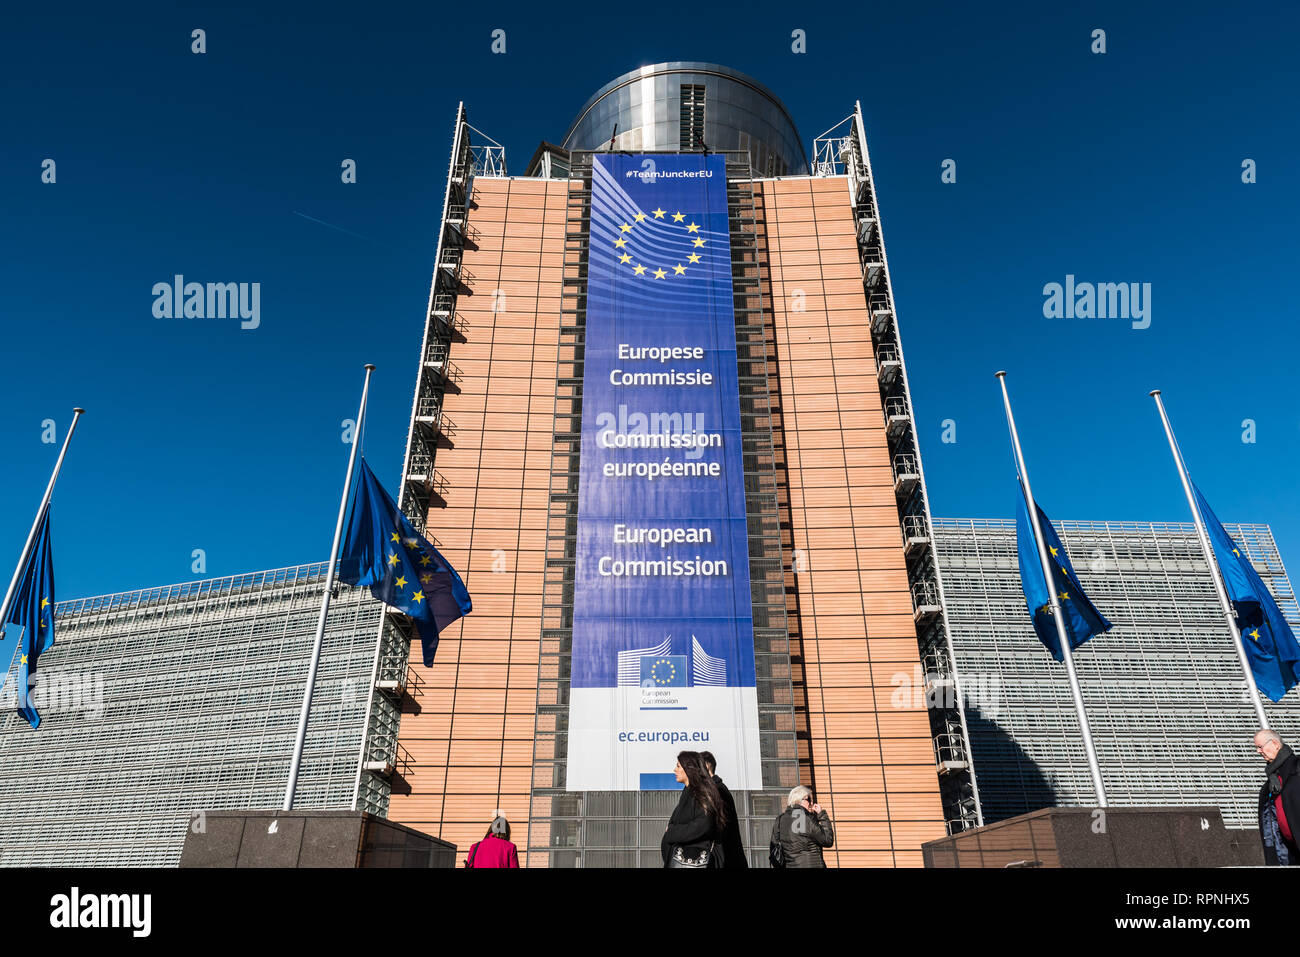 Exterior facade of the European Commission building in Brussels, Called the Berlaymont building Stock Photo